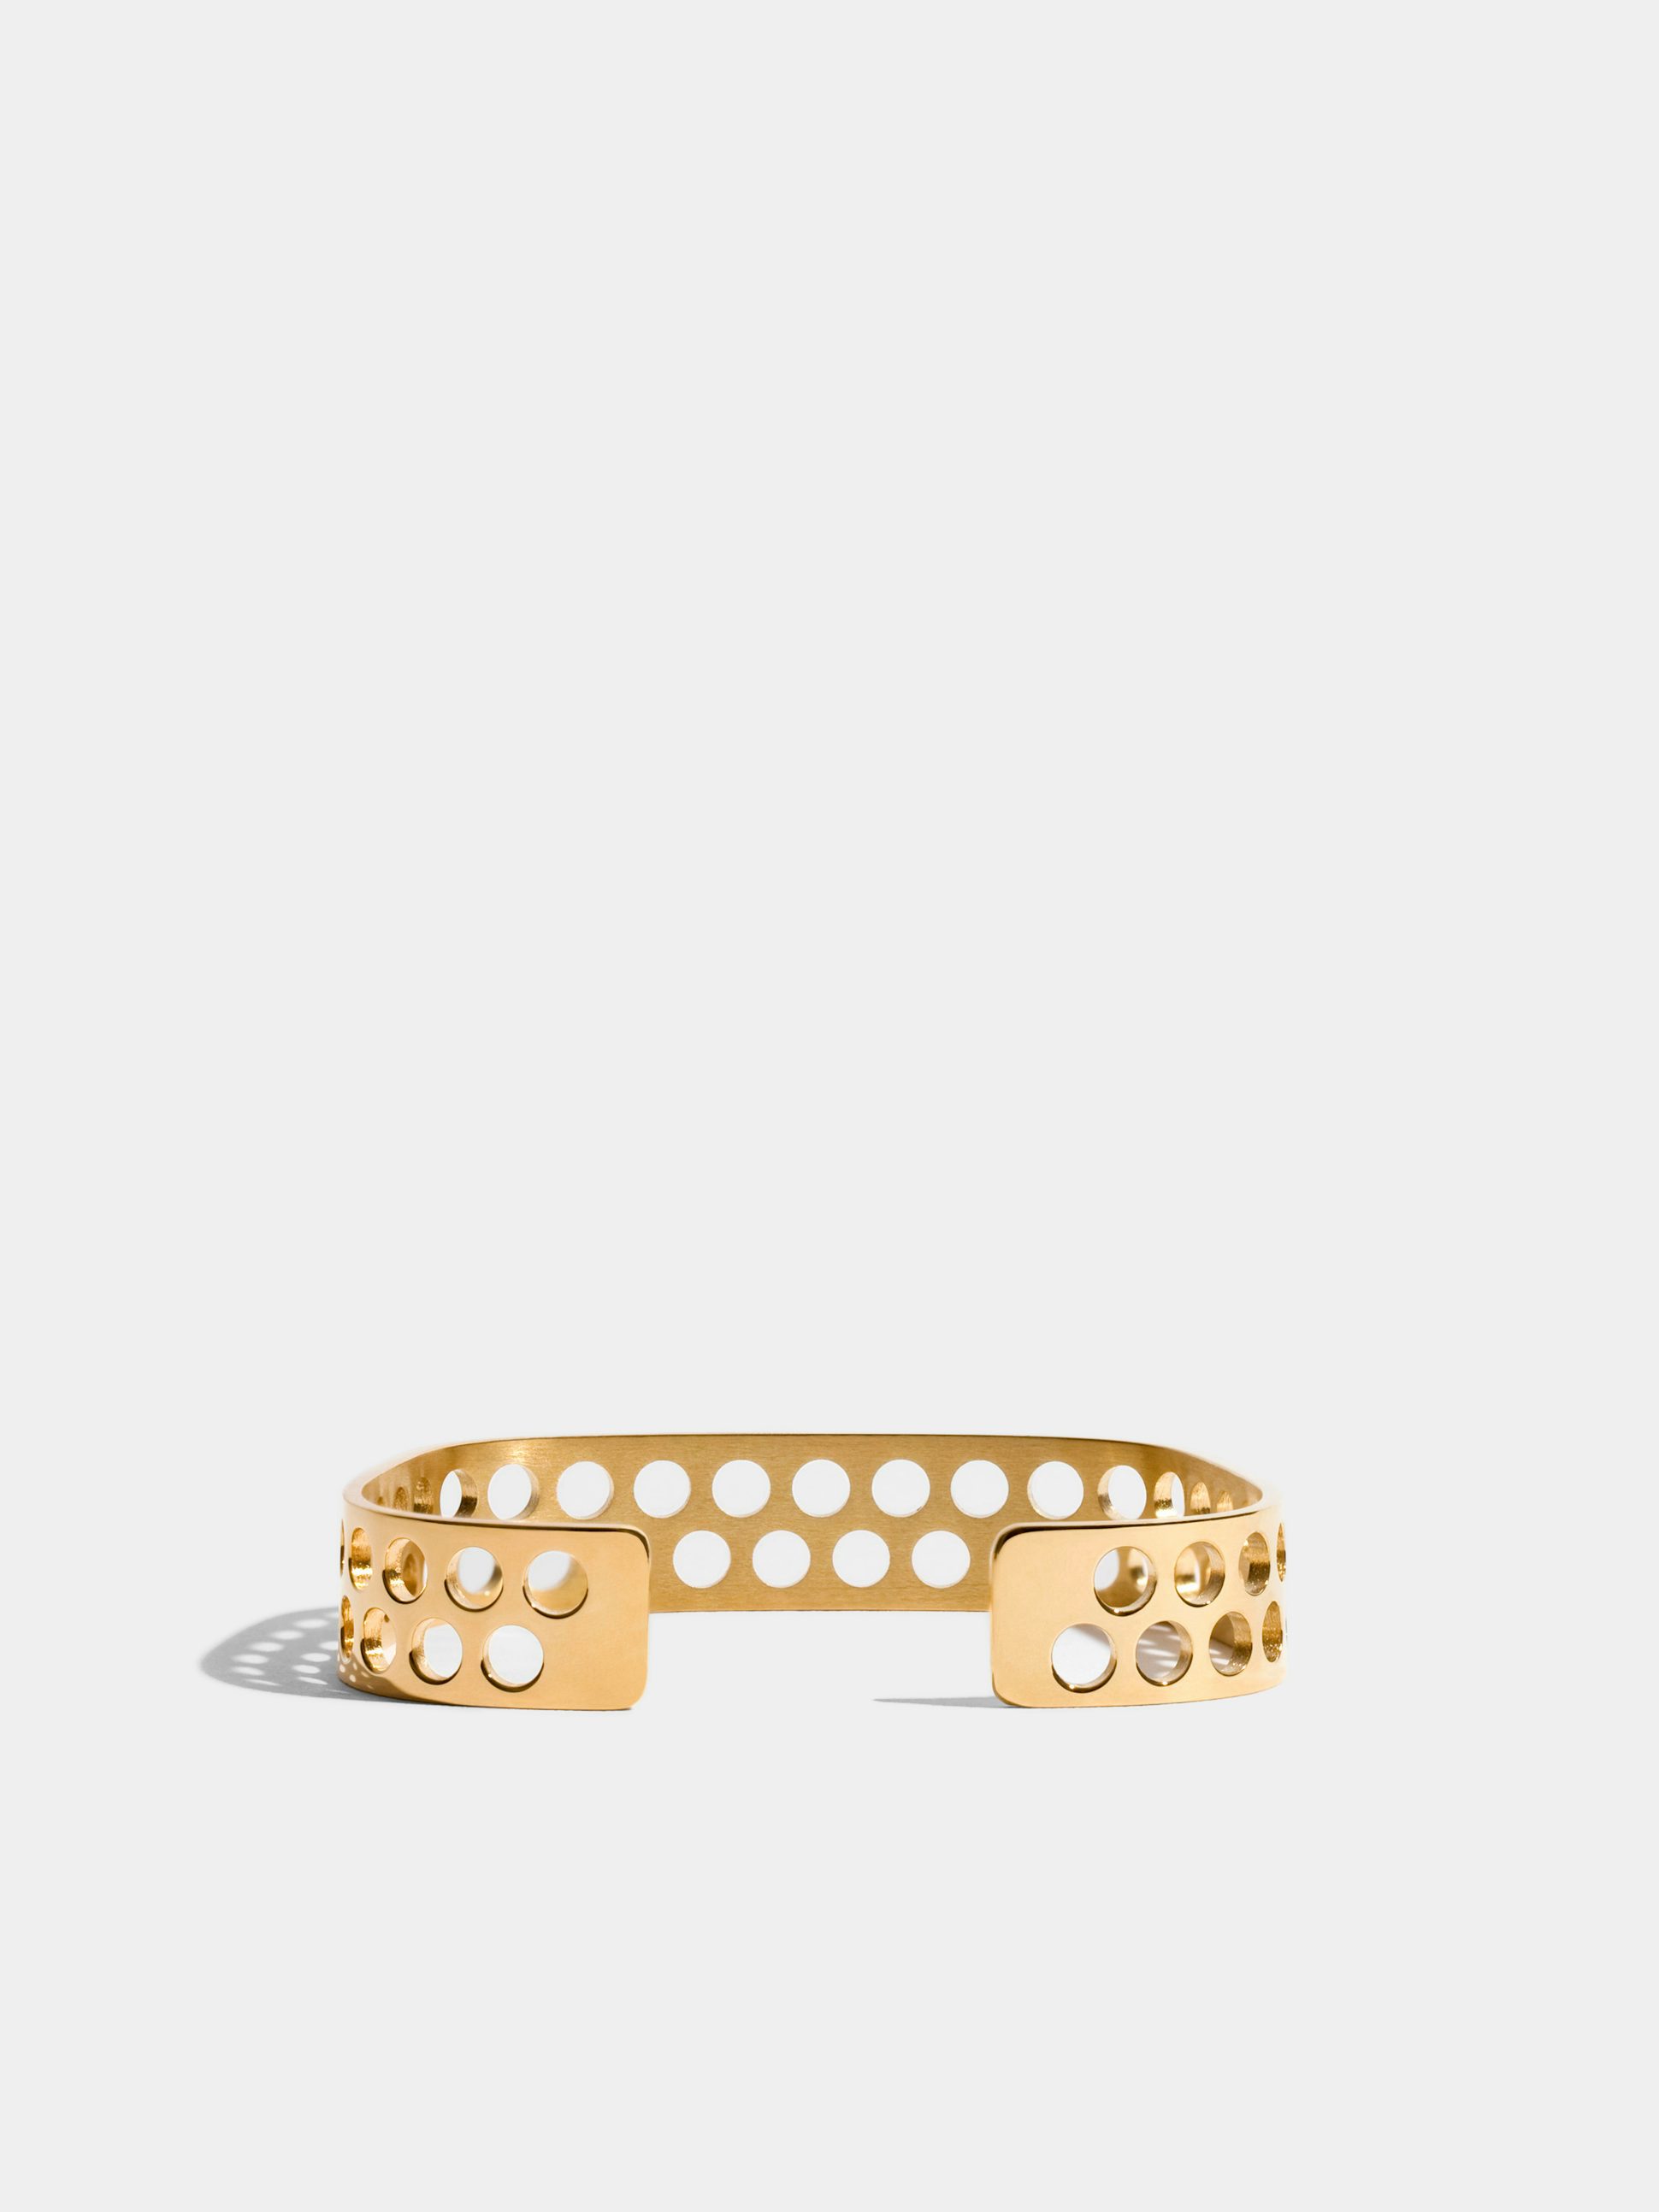 Voids, JEM by India Mahdavi, bracelet VIII in 18k Fairmined ethical yellow gold (2 rows, large perforations)